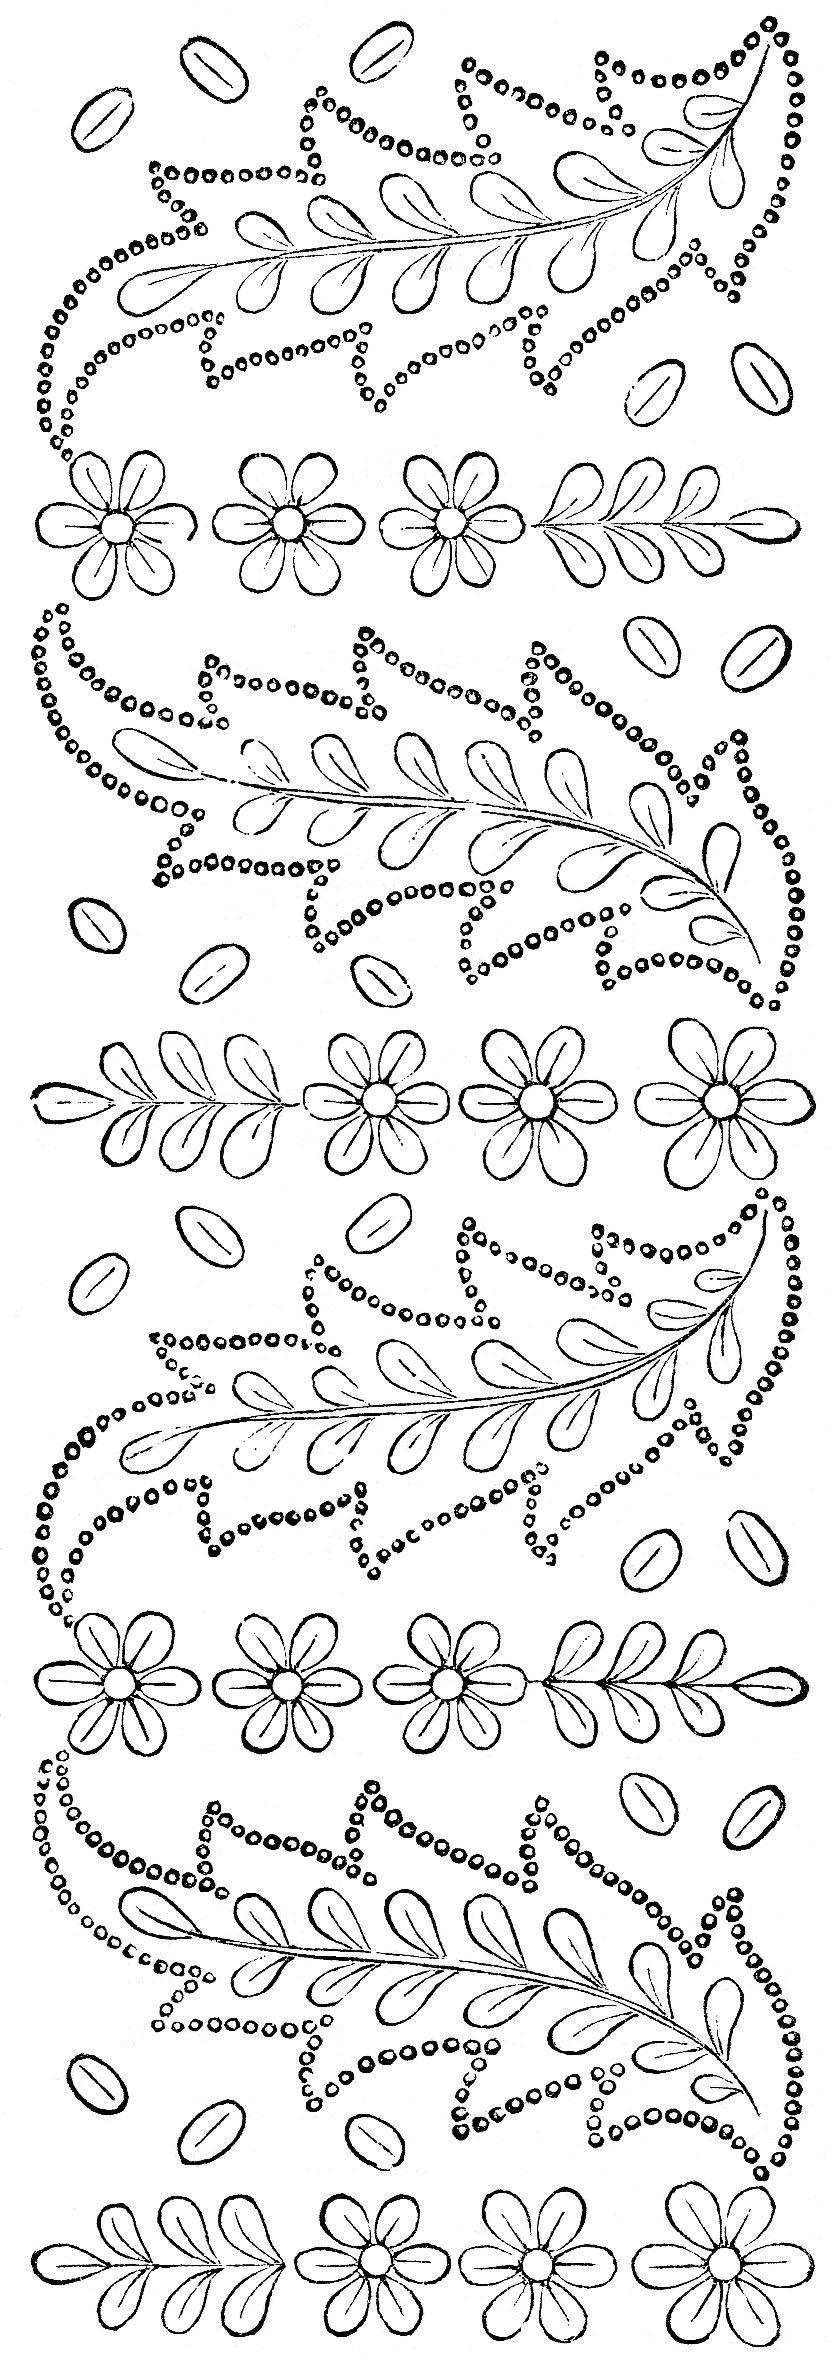 Hand Embroidery Patterns Free Vintage Free Vintage Embroidery Pattern For Hand Stitching Vintage Crafts